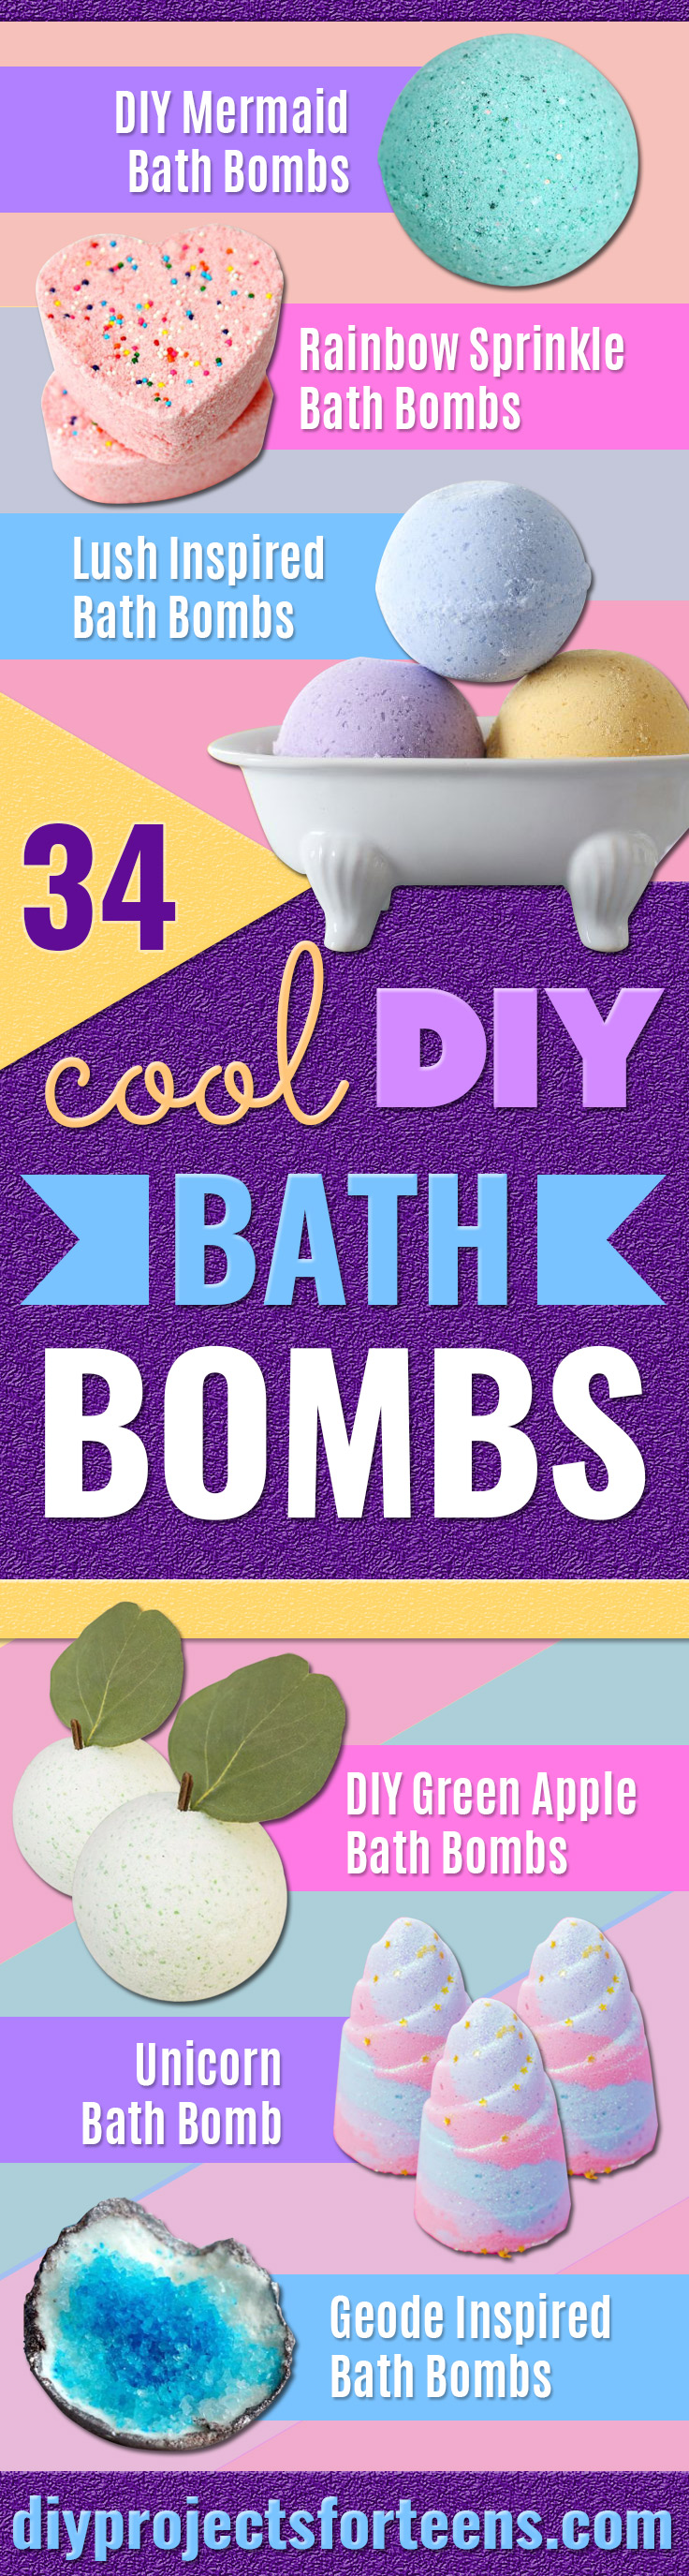 Easy DIY Bath Bombs to Make At Home - Recipes and Tutorial for How To Make A Bath Bomb - Best Bathbomb Ideas - Fun DIY Projects for Women, Teens, and Girls | DIY Bath Bombs Recipe and Tutorials | Make Cheap Gifts Like Lush Bath Bombs #bathbombs #teencrafts #diyideas